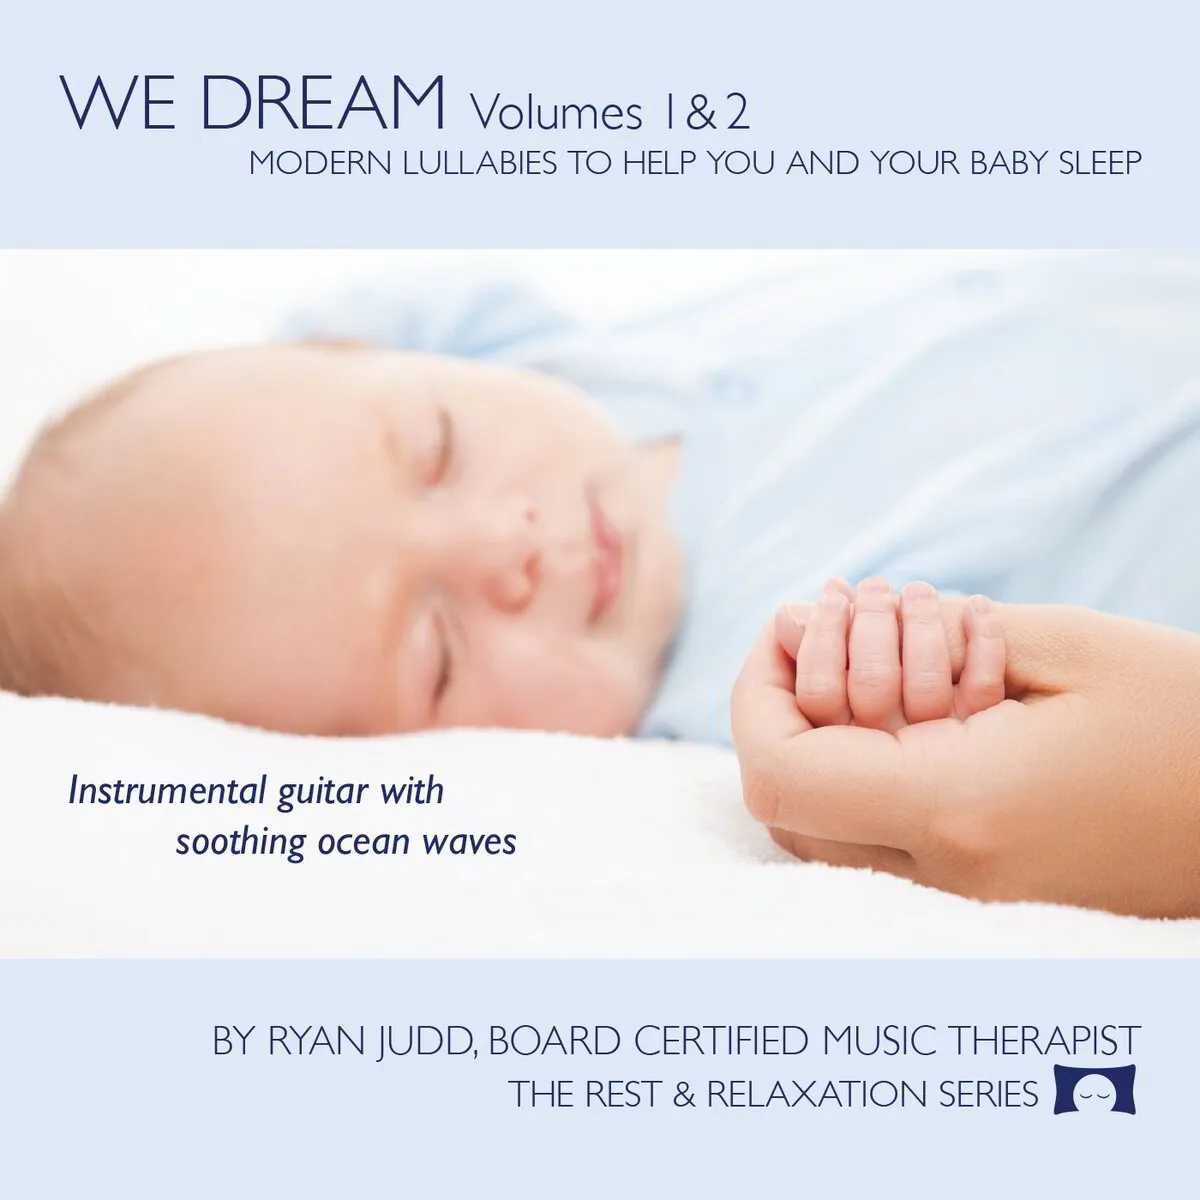 2-Disc Lullaby CD Set - We Dream: Volumes 1 and 2 - Digital Download